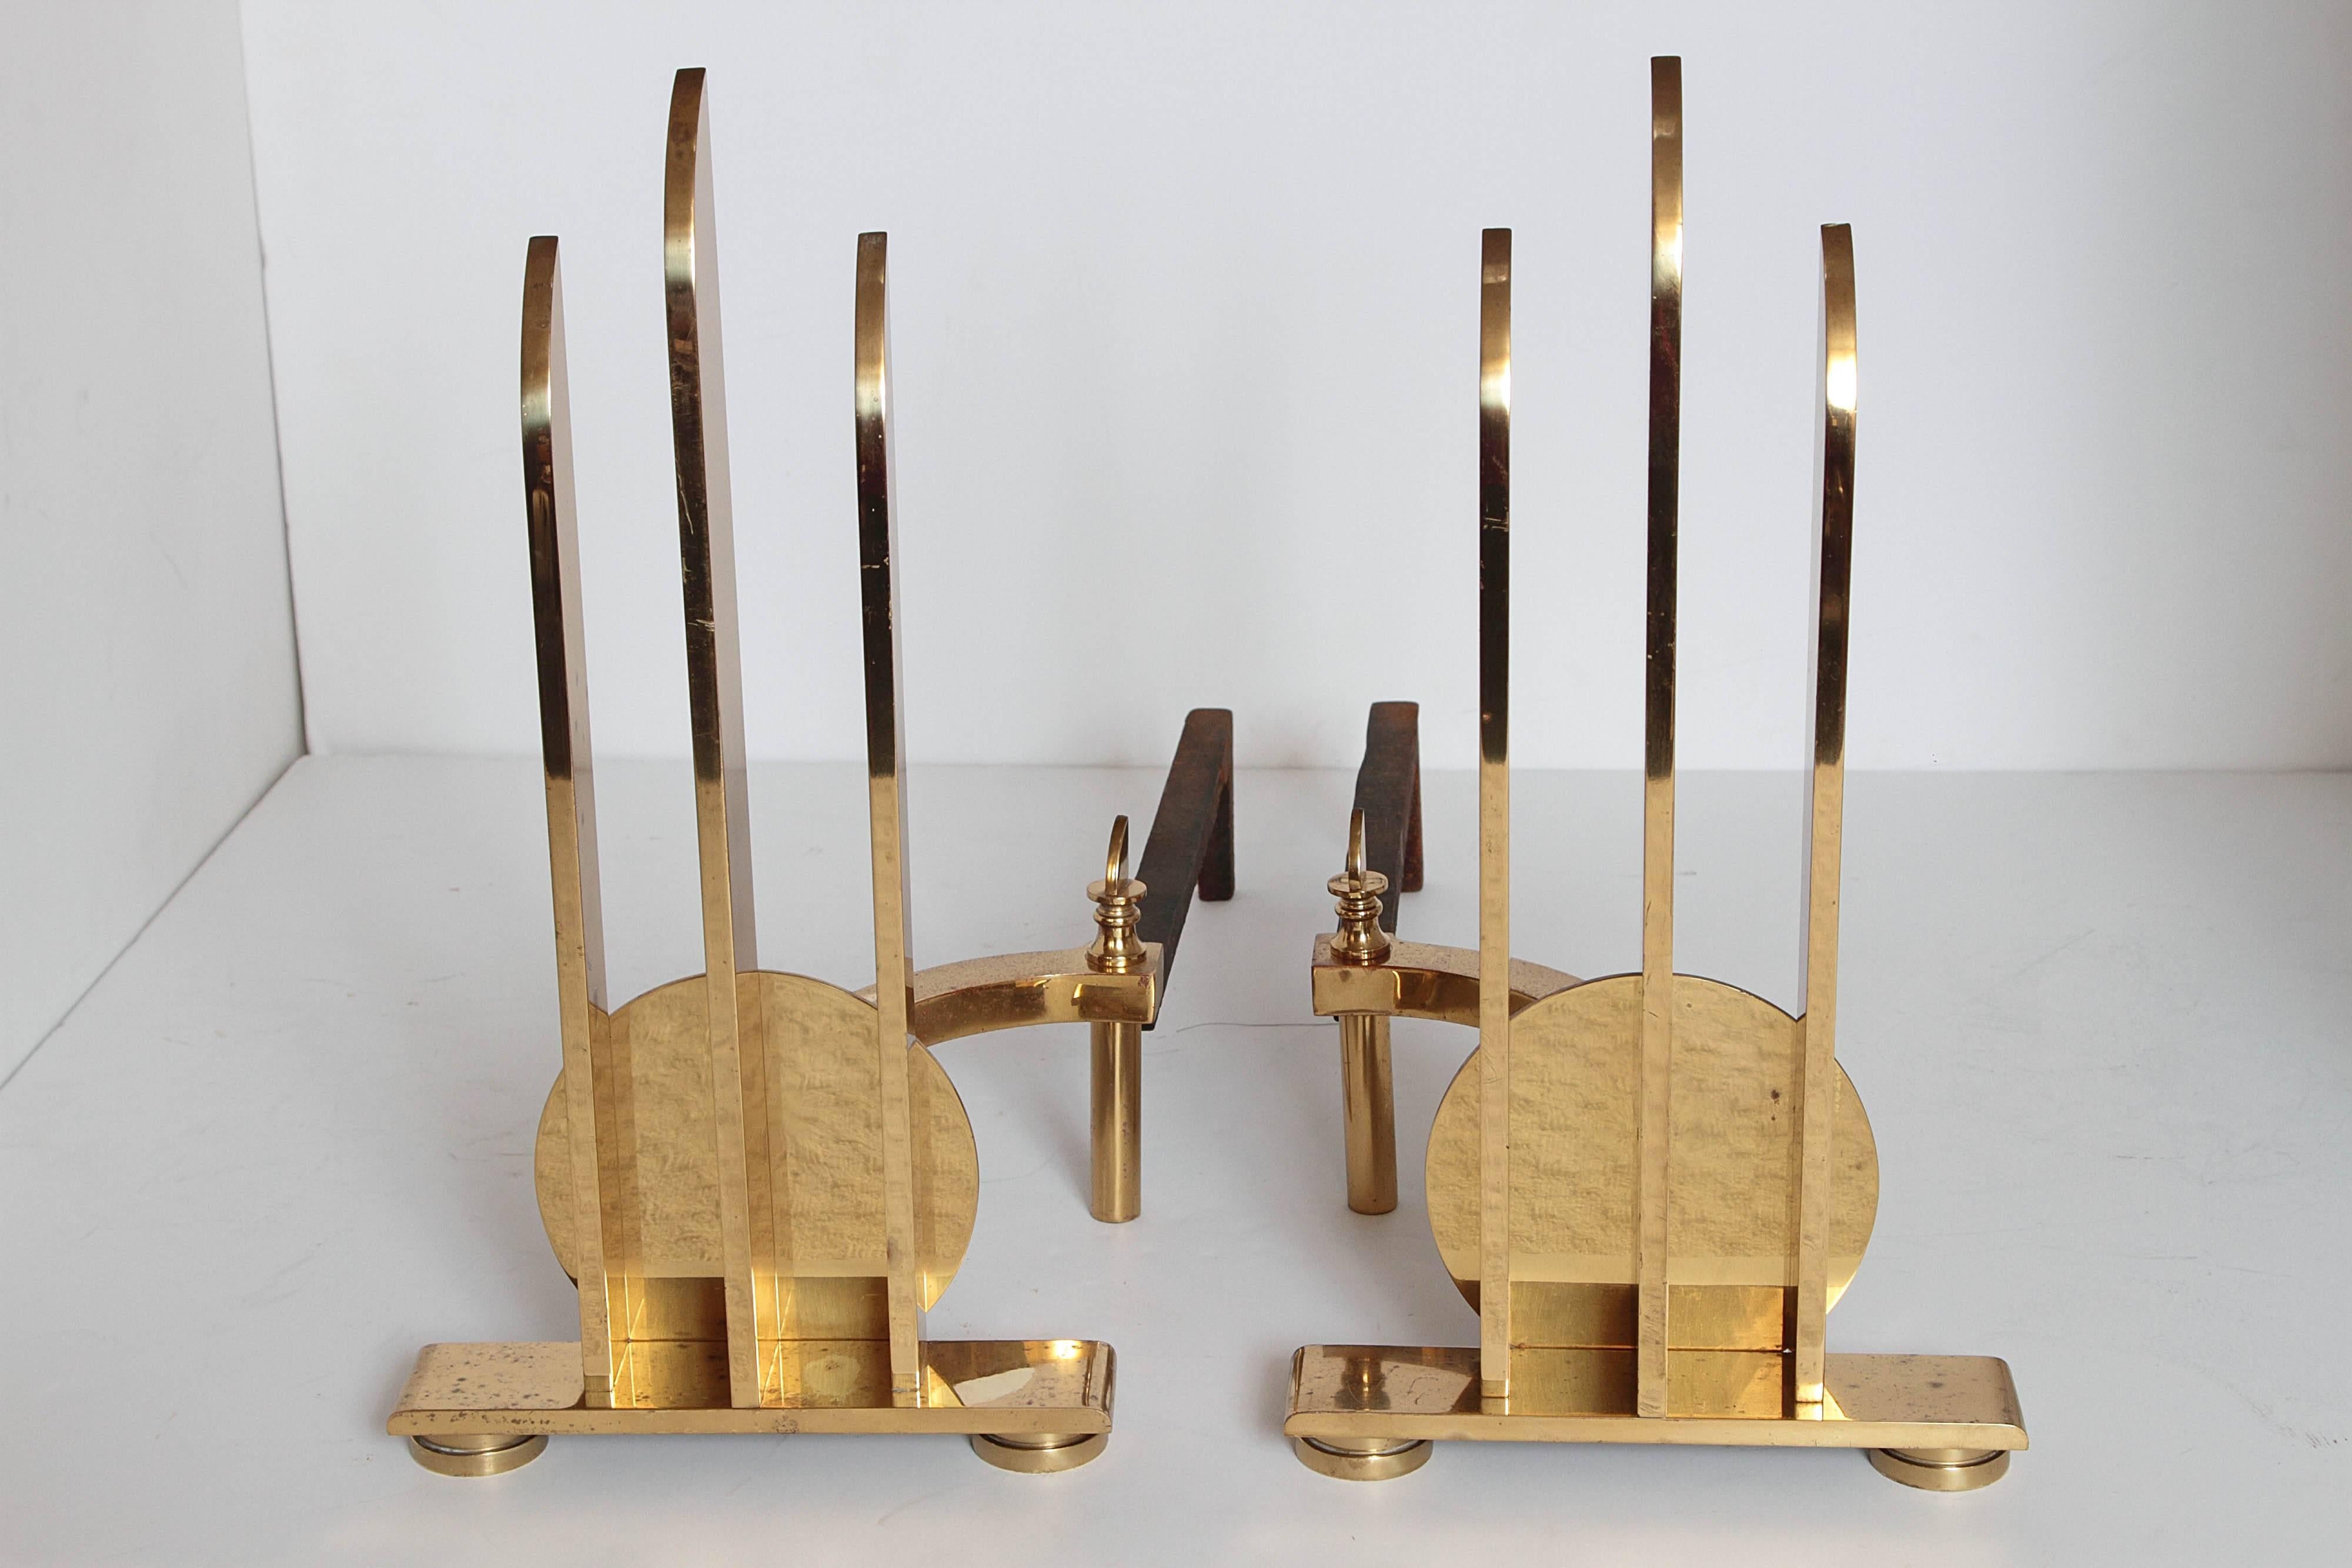 Matched set. You will rarely find this set with the original matching tools and stand.
Other than normal use, this set is in amazing original condition. Nice patina to the tool set, andirons highly polished and lacquered.
Unparalleled solid brass